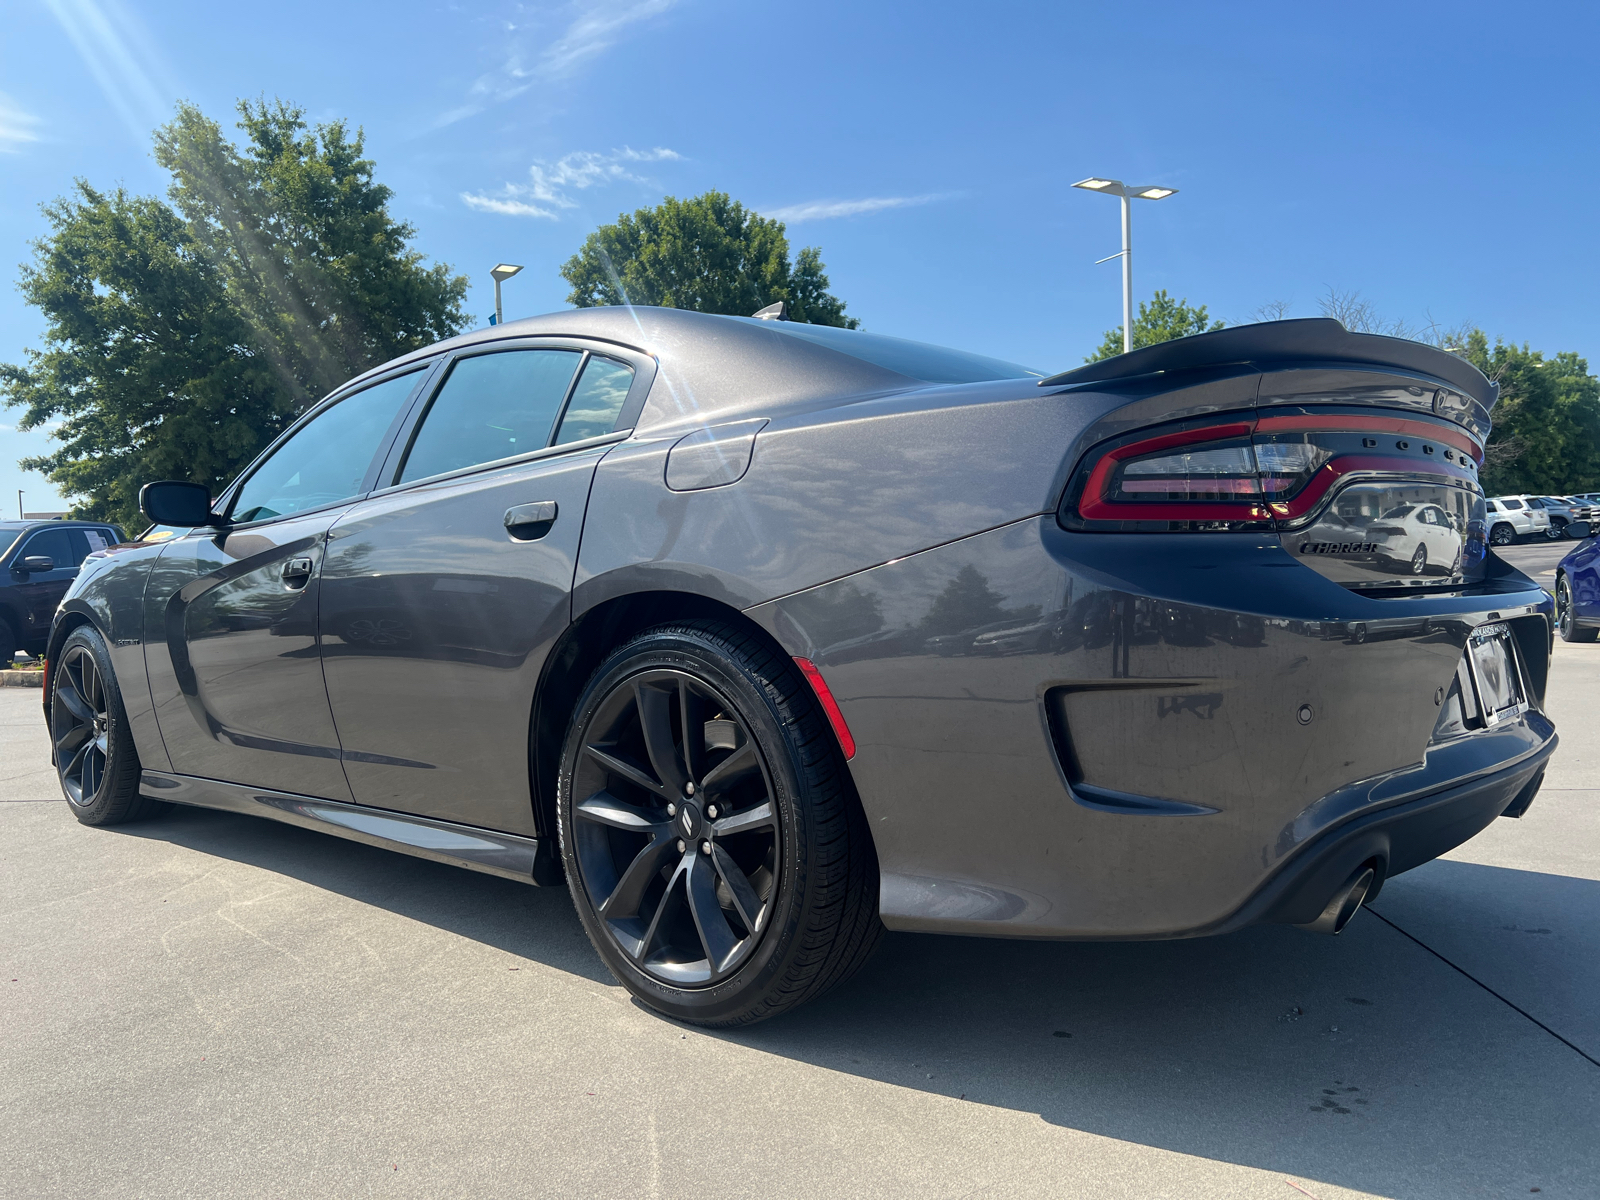 2021 Dodge Charger R/T 6